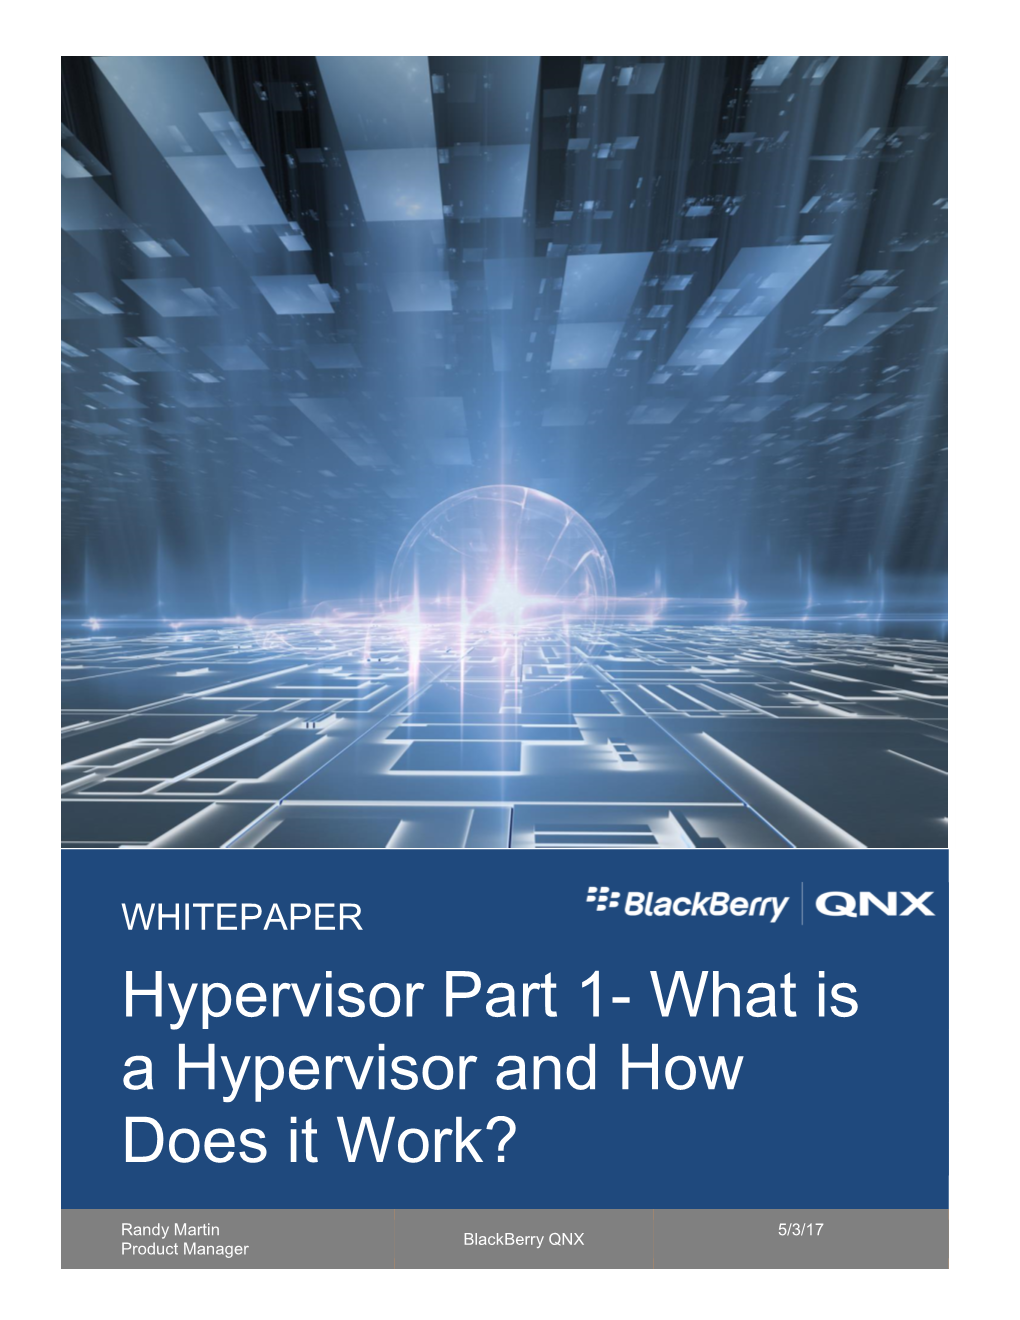 Hypervisor Part 1- What Is a Hypervisor and How